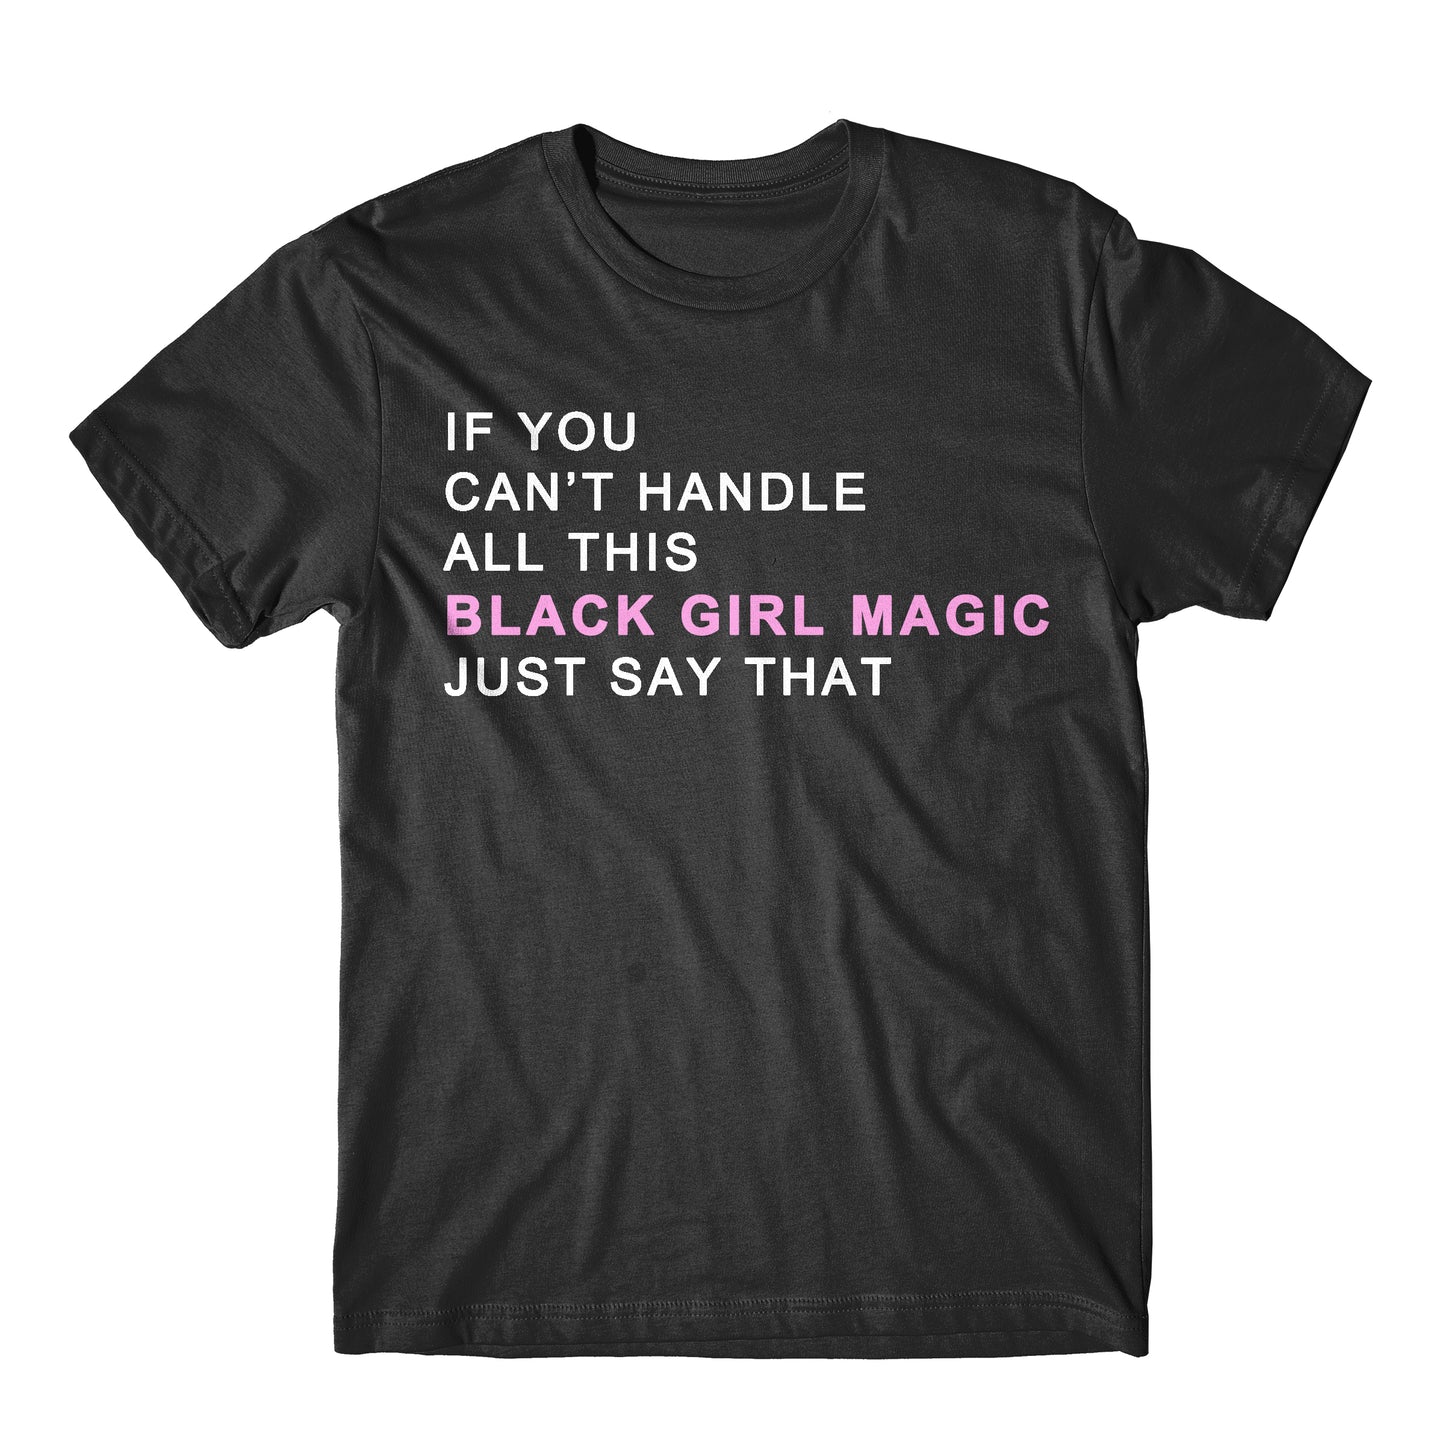 "If You Can't Handle All This Black Girl Magic" Tee